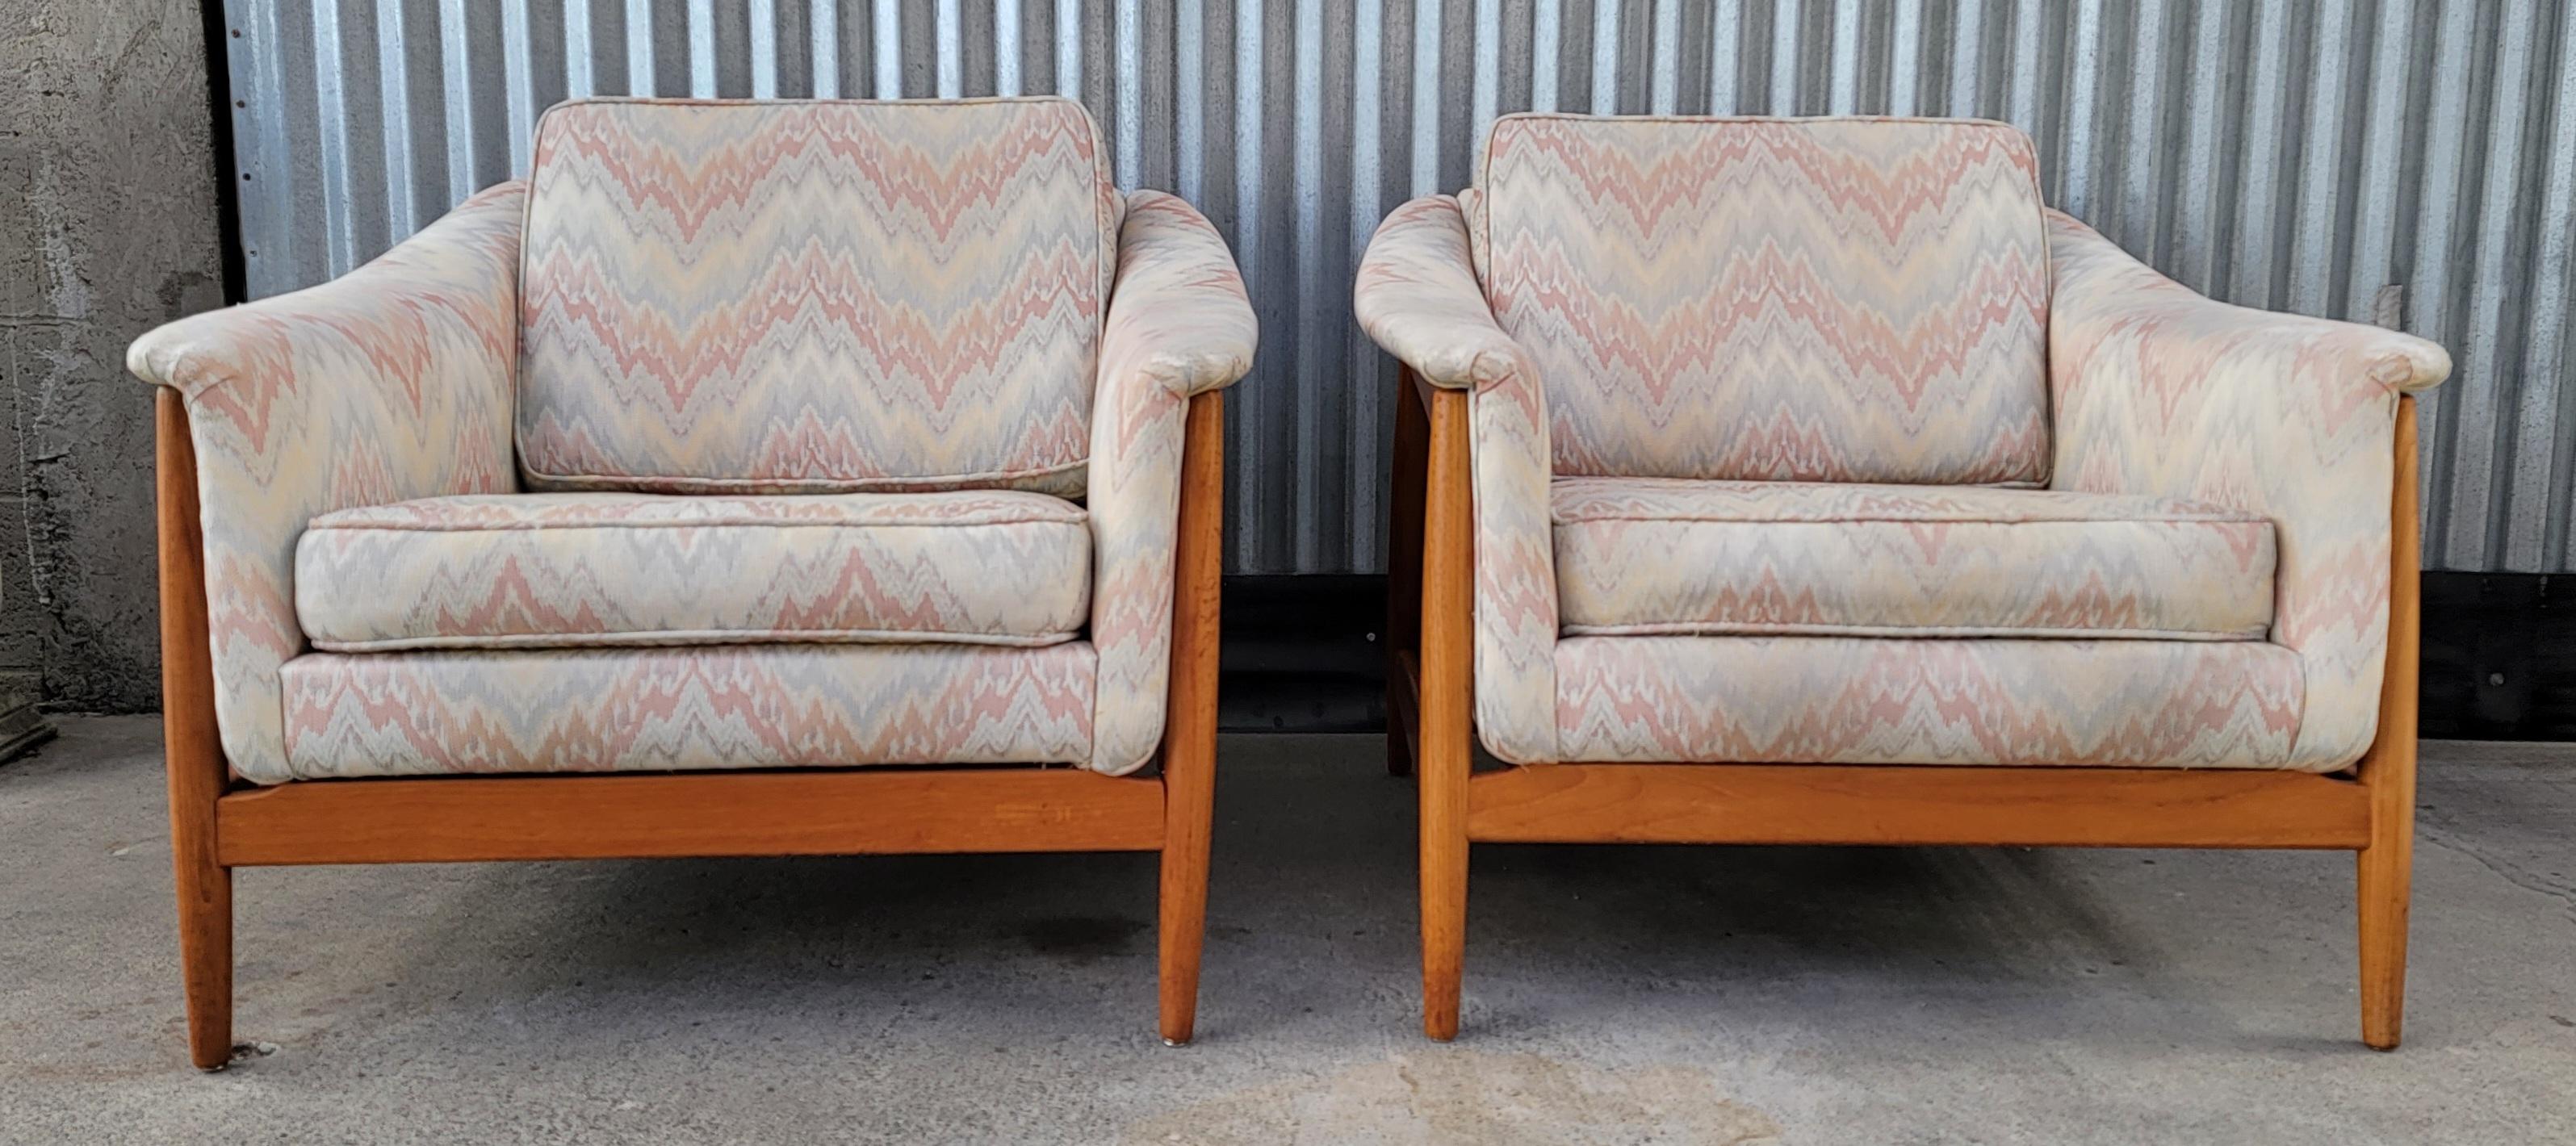 A pair of solid teak upholstered lounge chairs designed by Folke Ohlsson for Dux of Sweden. Classic Scandinavian / Danish Modern design with exoskeleton frames cradling a curvaceous and very comfortable upholstered seat. Reversible cushions.